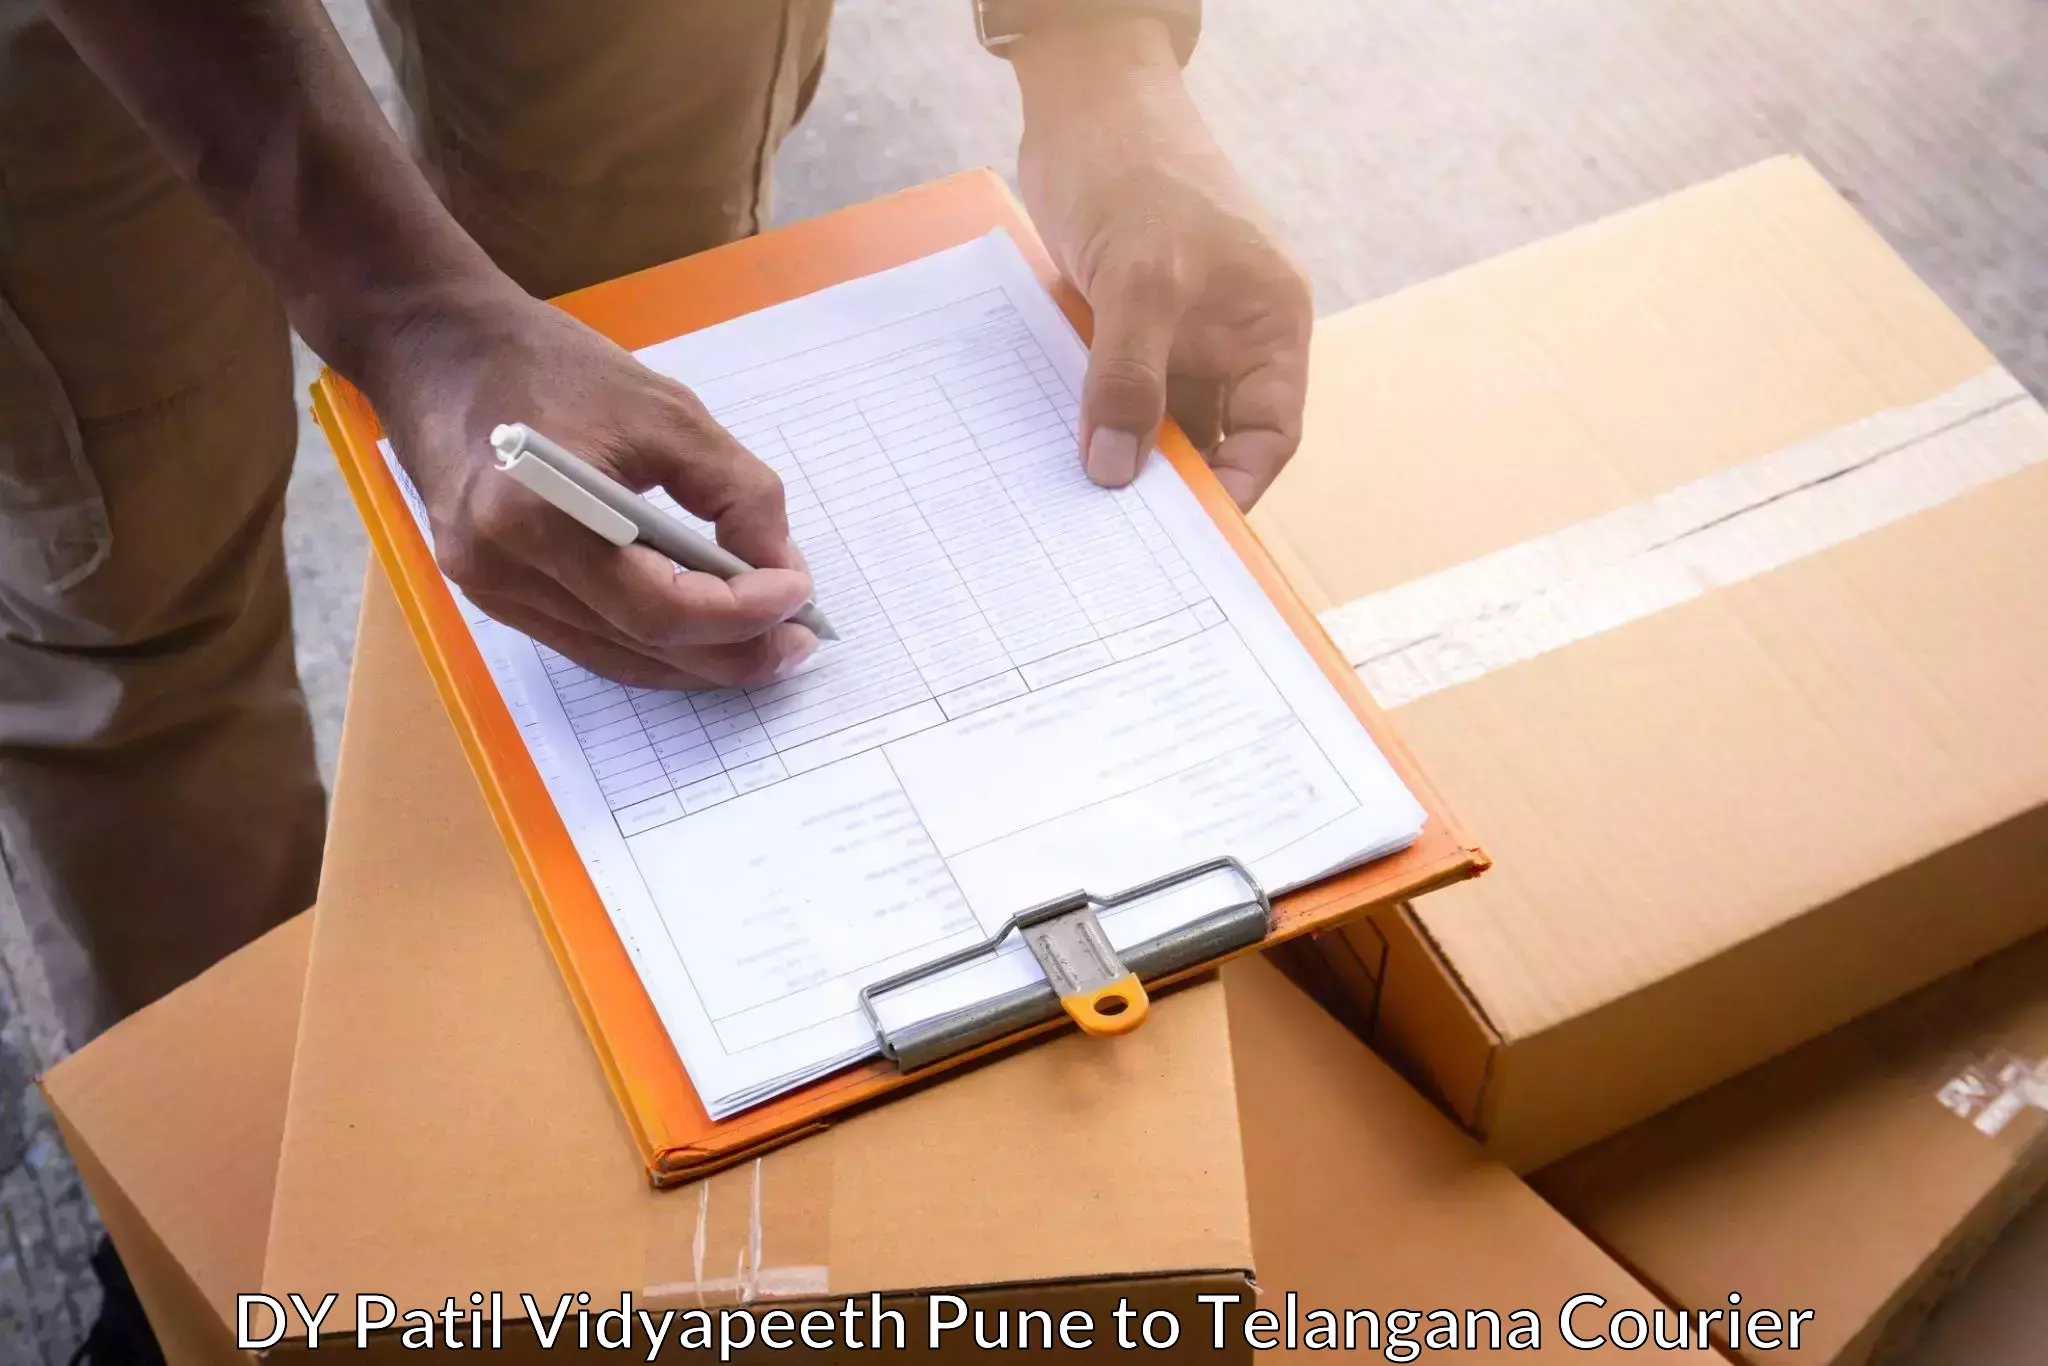 Cargo courier service DY Patil Vidyapeeth Pune to Marikal